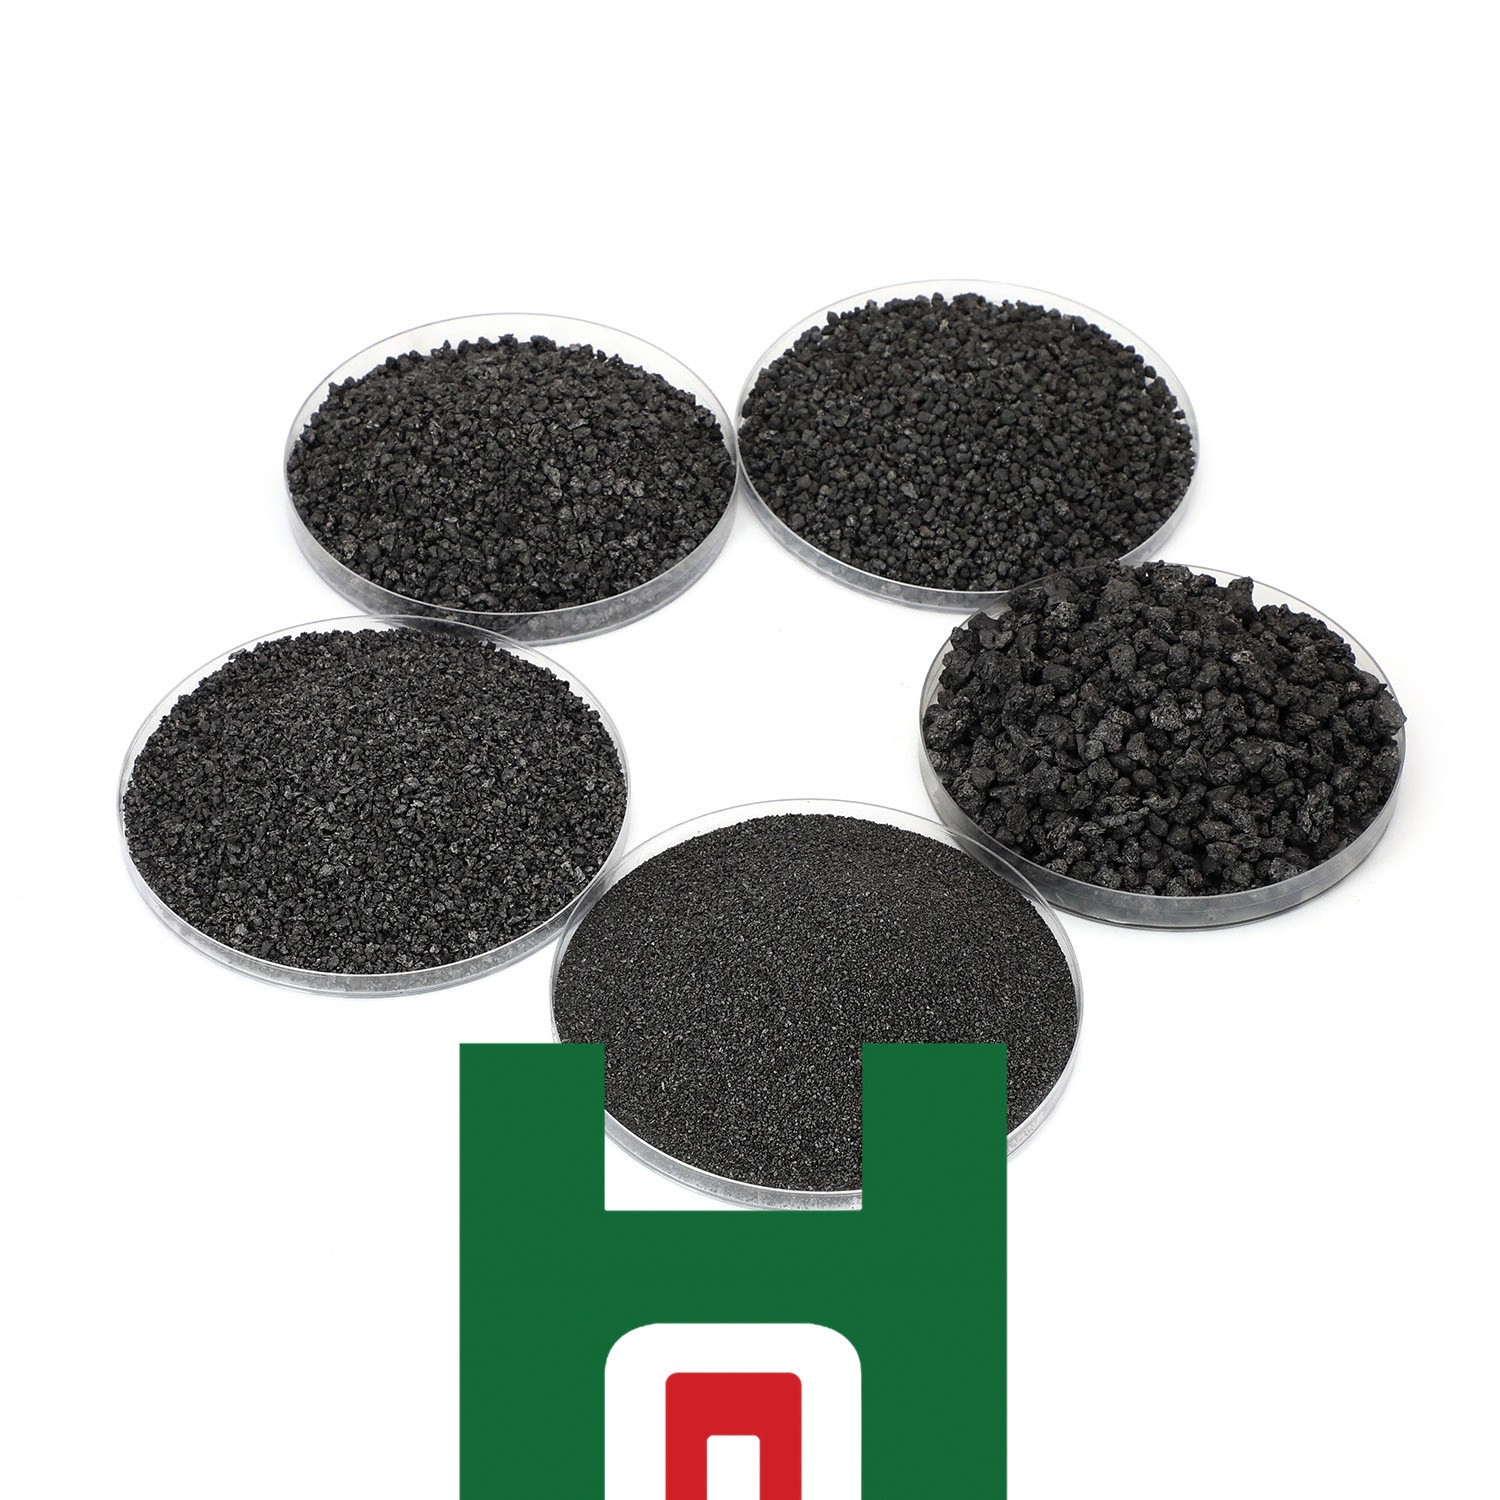 High-purity graphitized petroleum coke